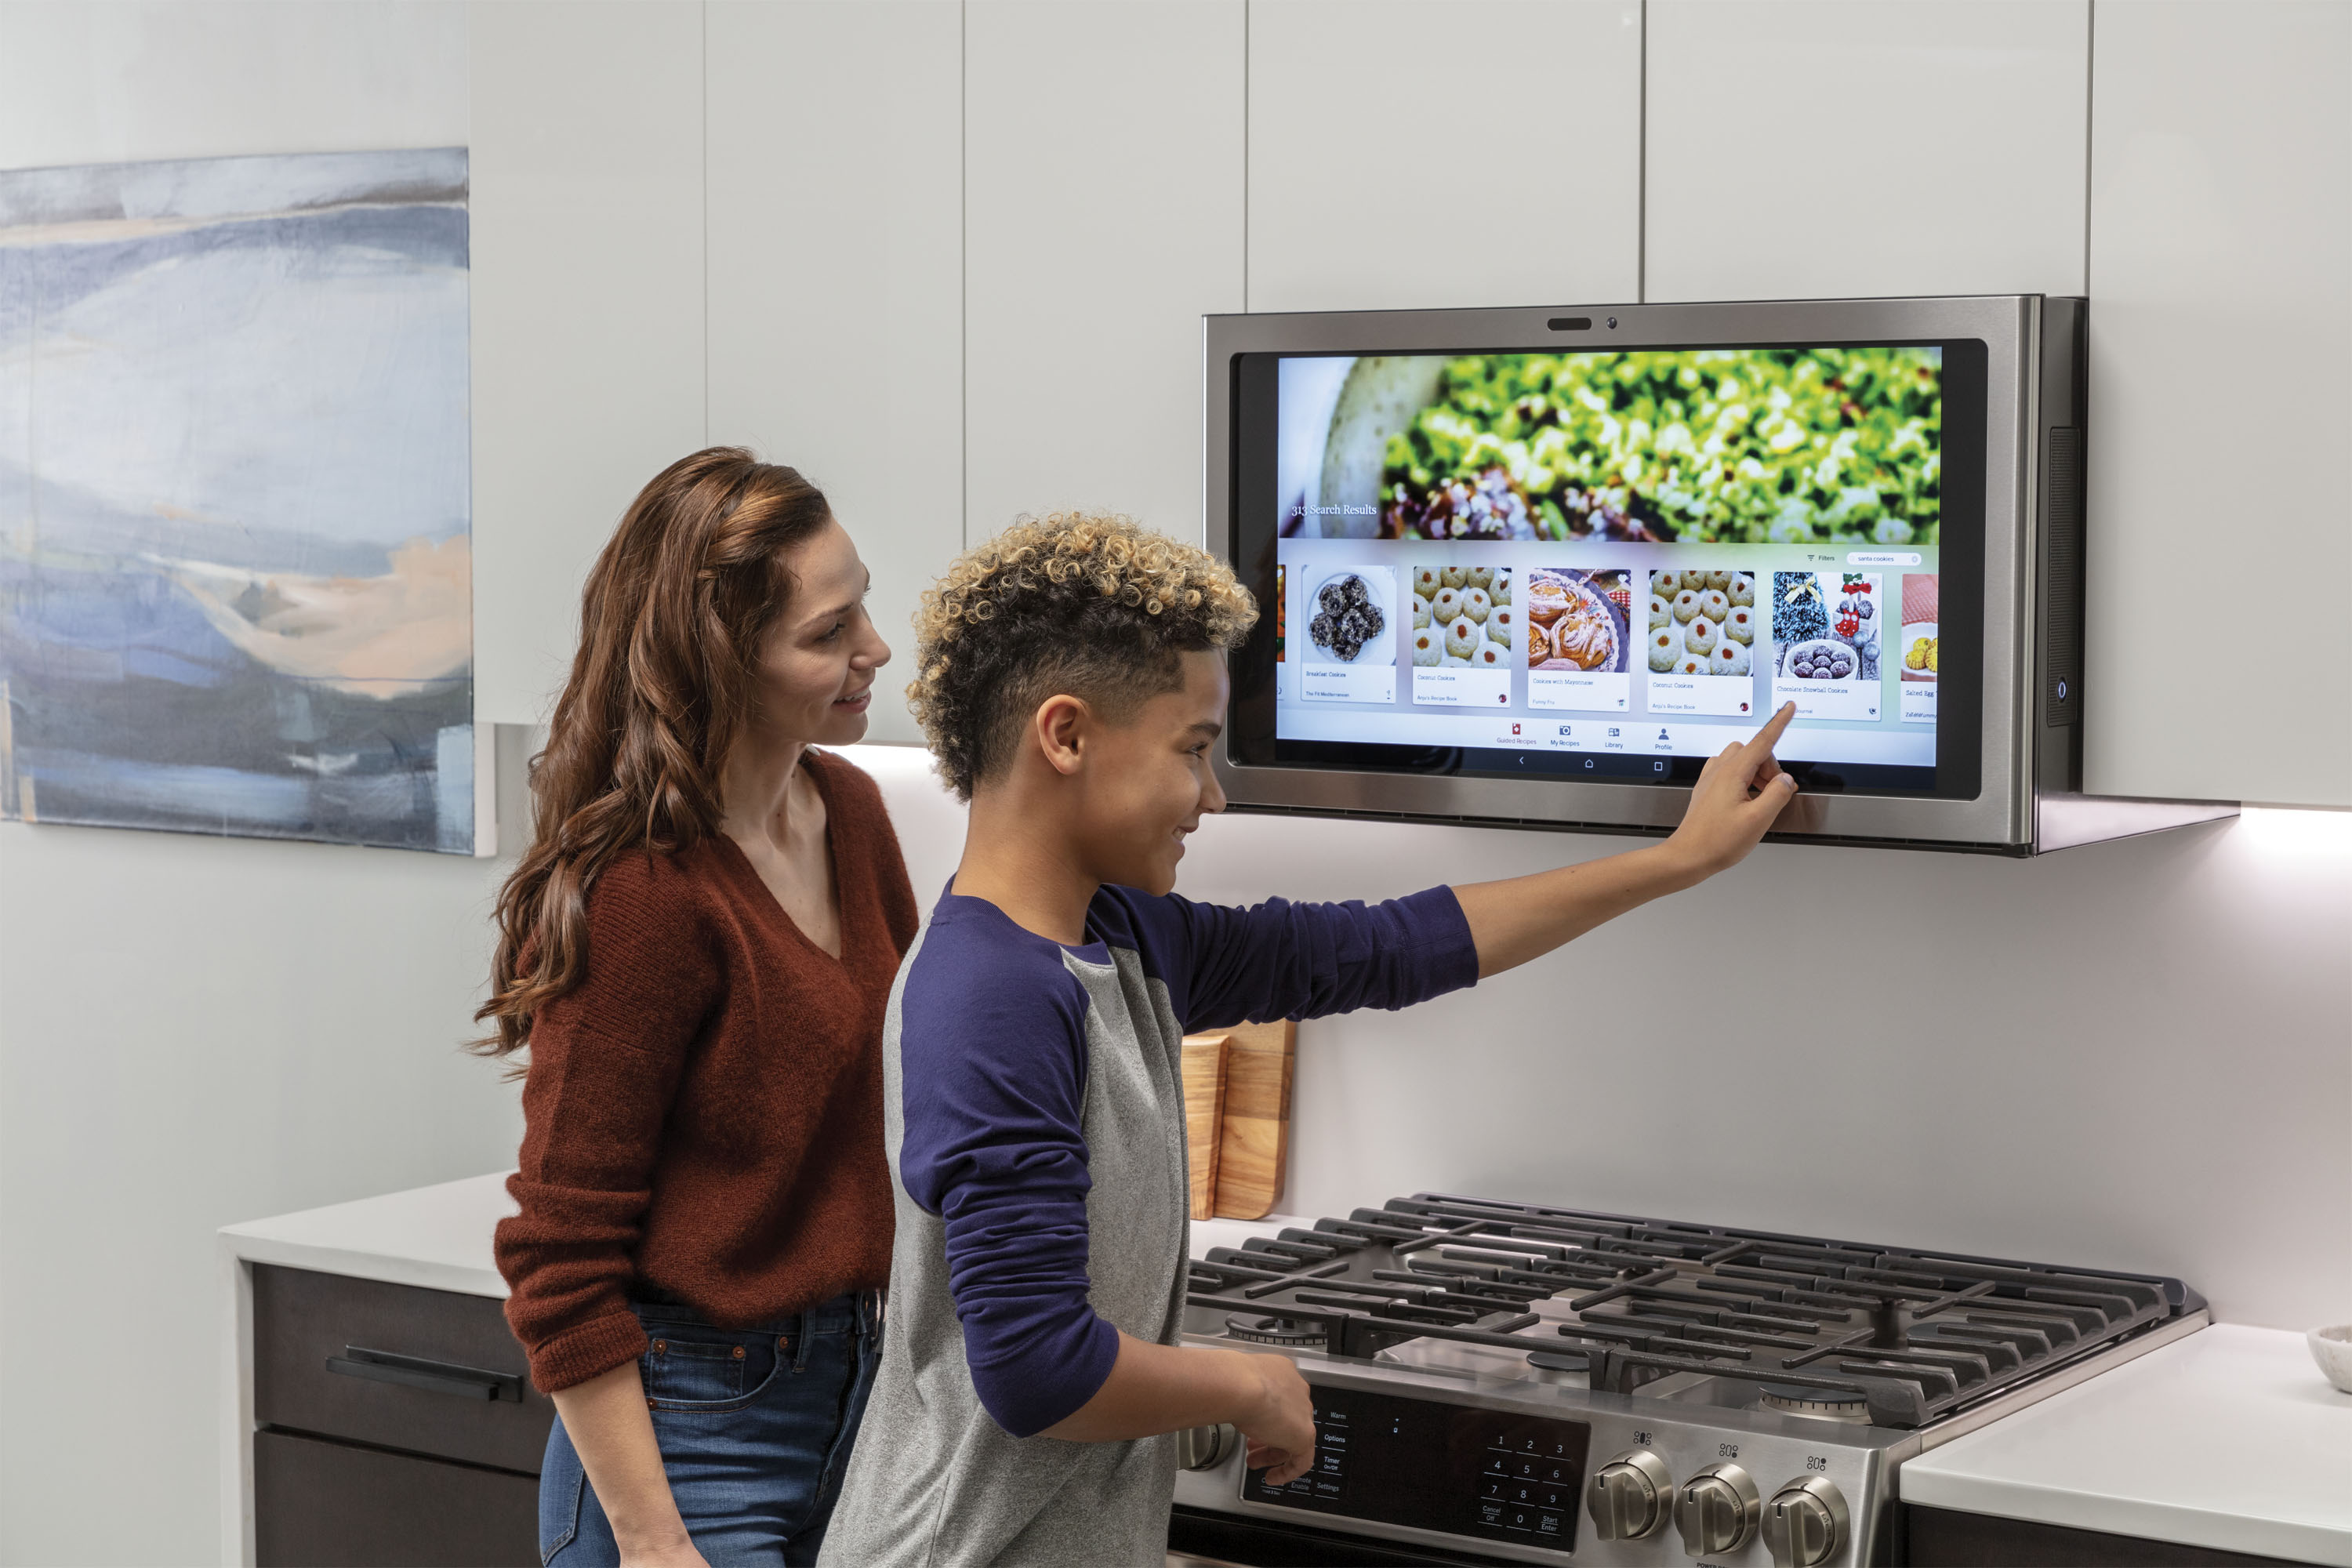 Smarter cooking with connected appliances